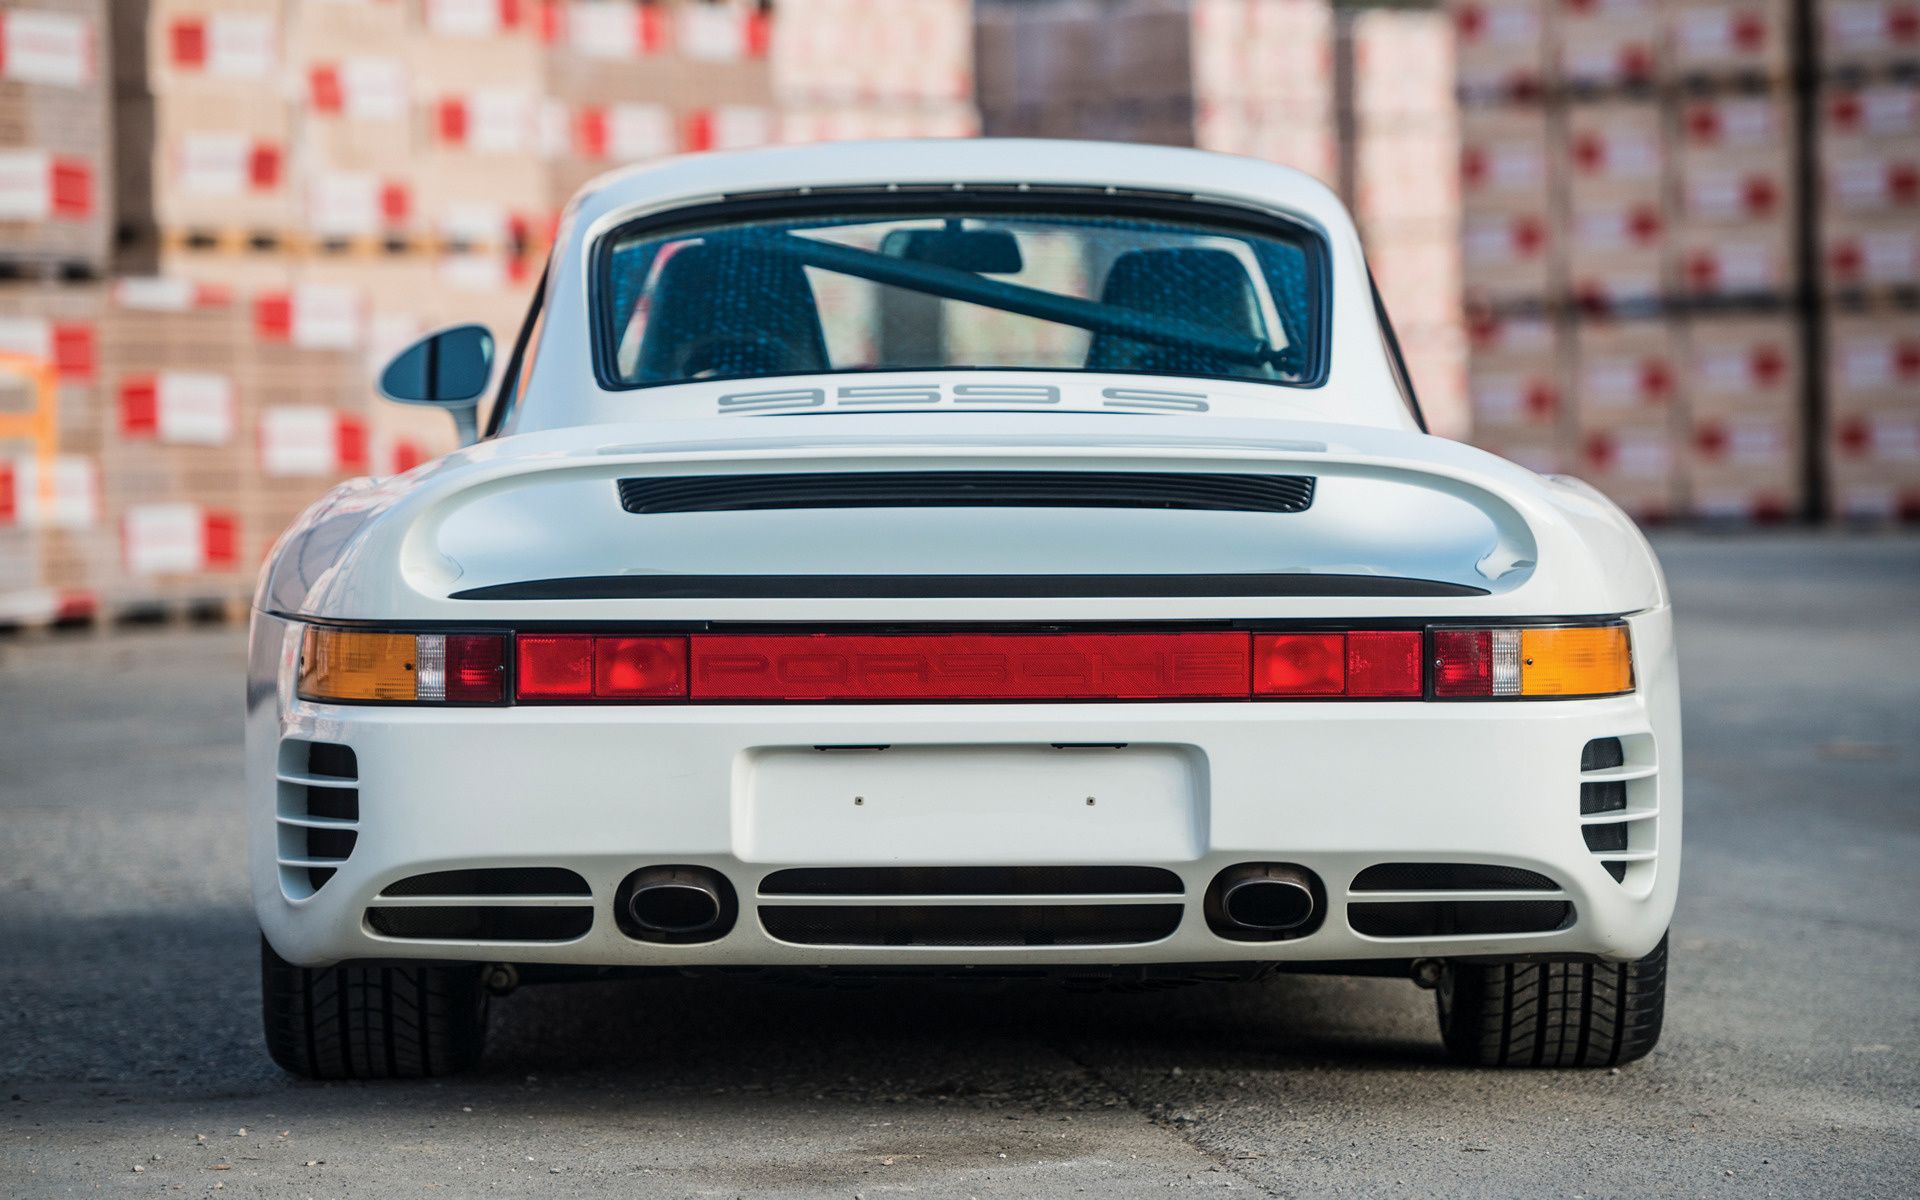 Porsche 959 S and HD Image